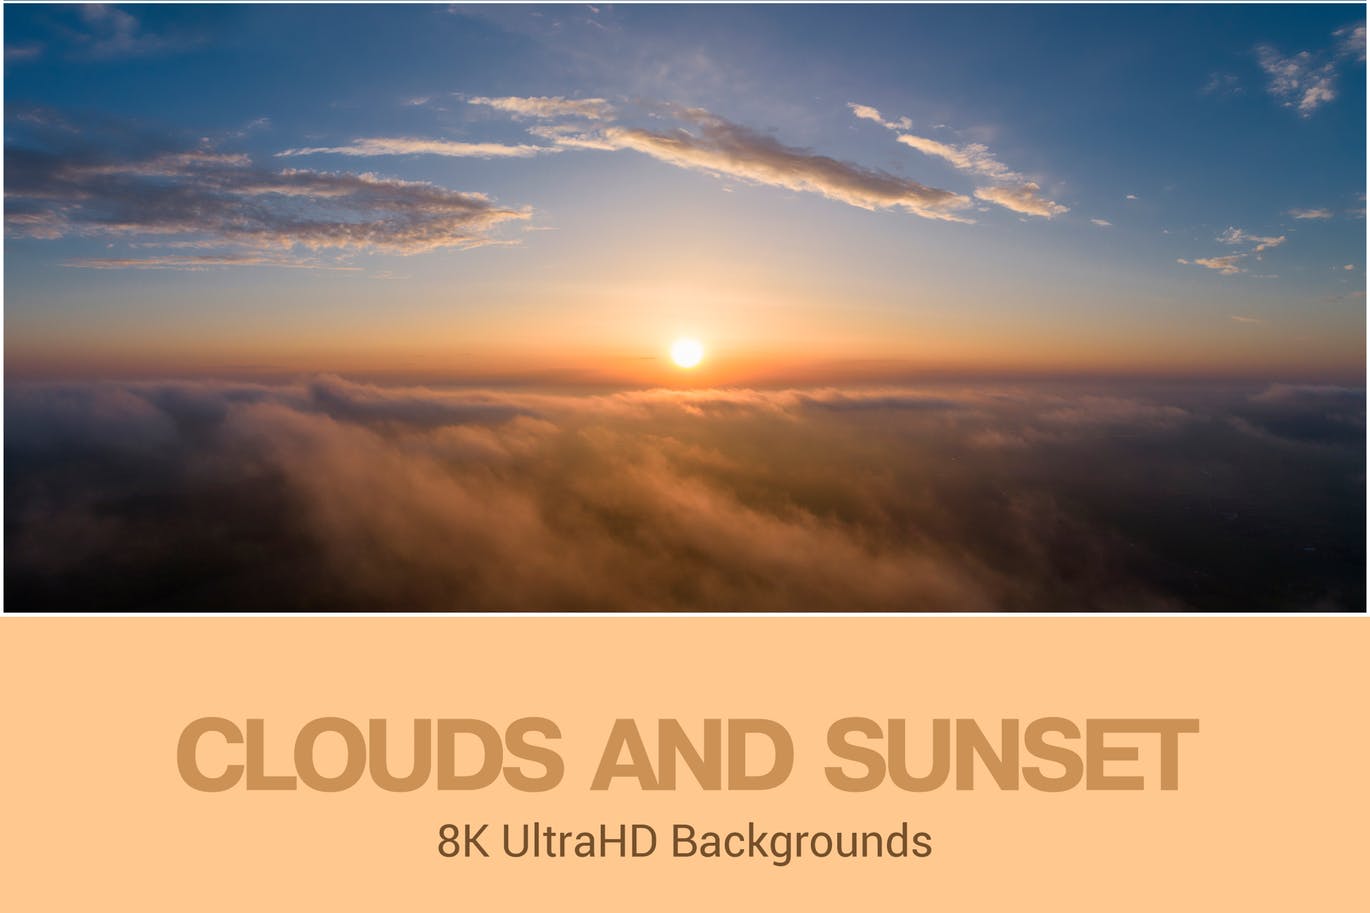 8K超高清晚霞天空背景图素材 8K UltraHD Clouds and Sunset Backgrounds插图